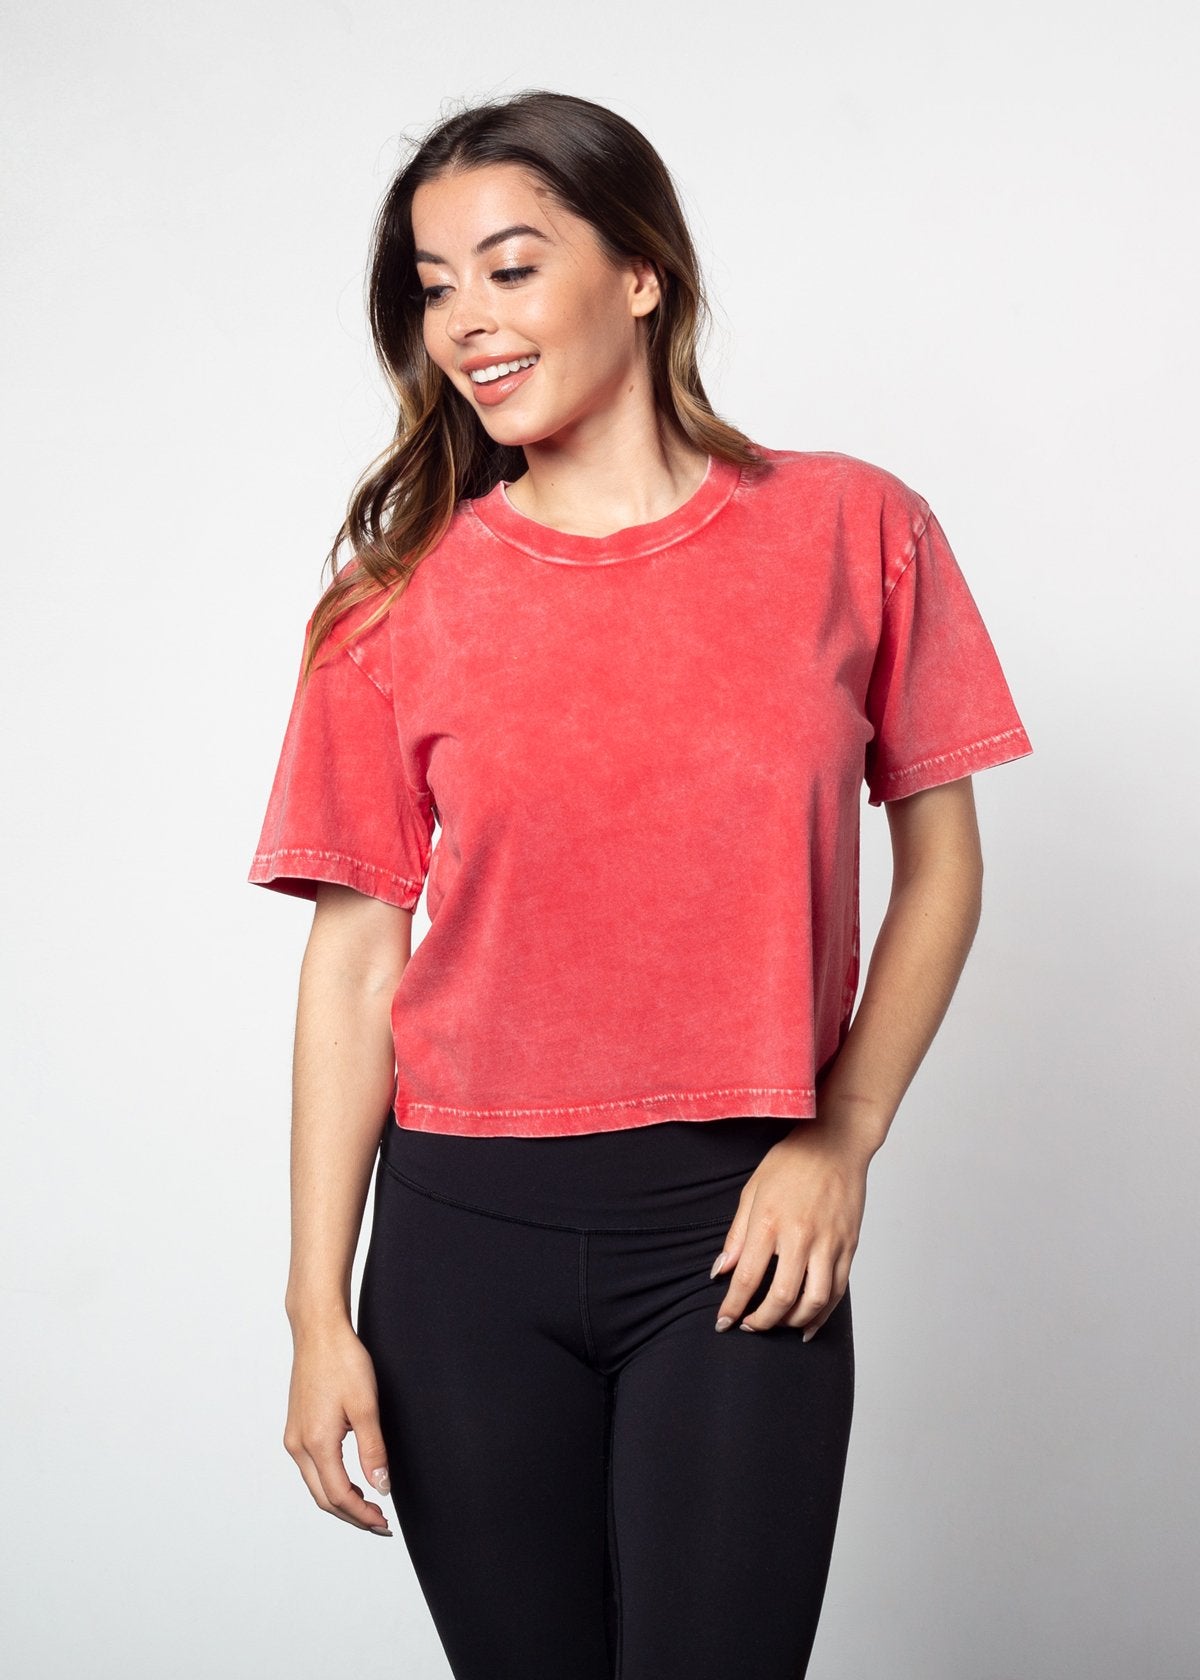 Cardinal cropped short sleeve tee in a relaxed boxy silhouette with a vintage inspired wash finish.